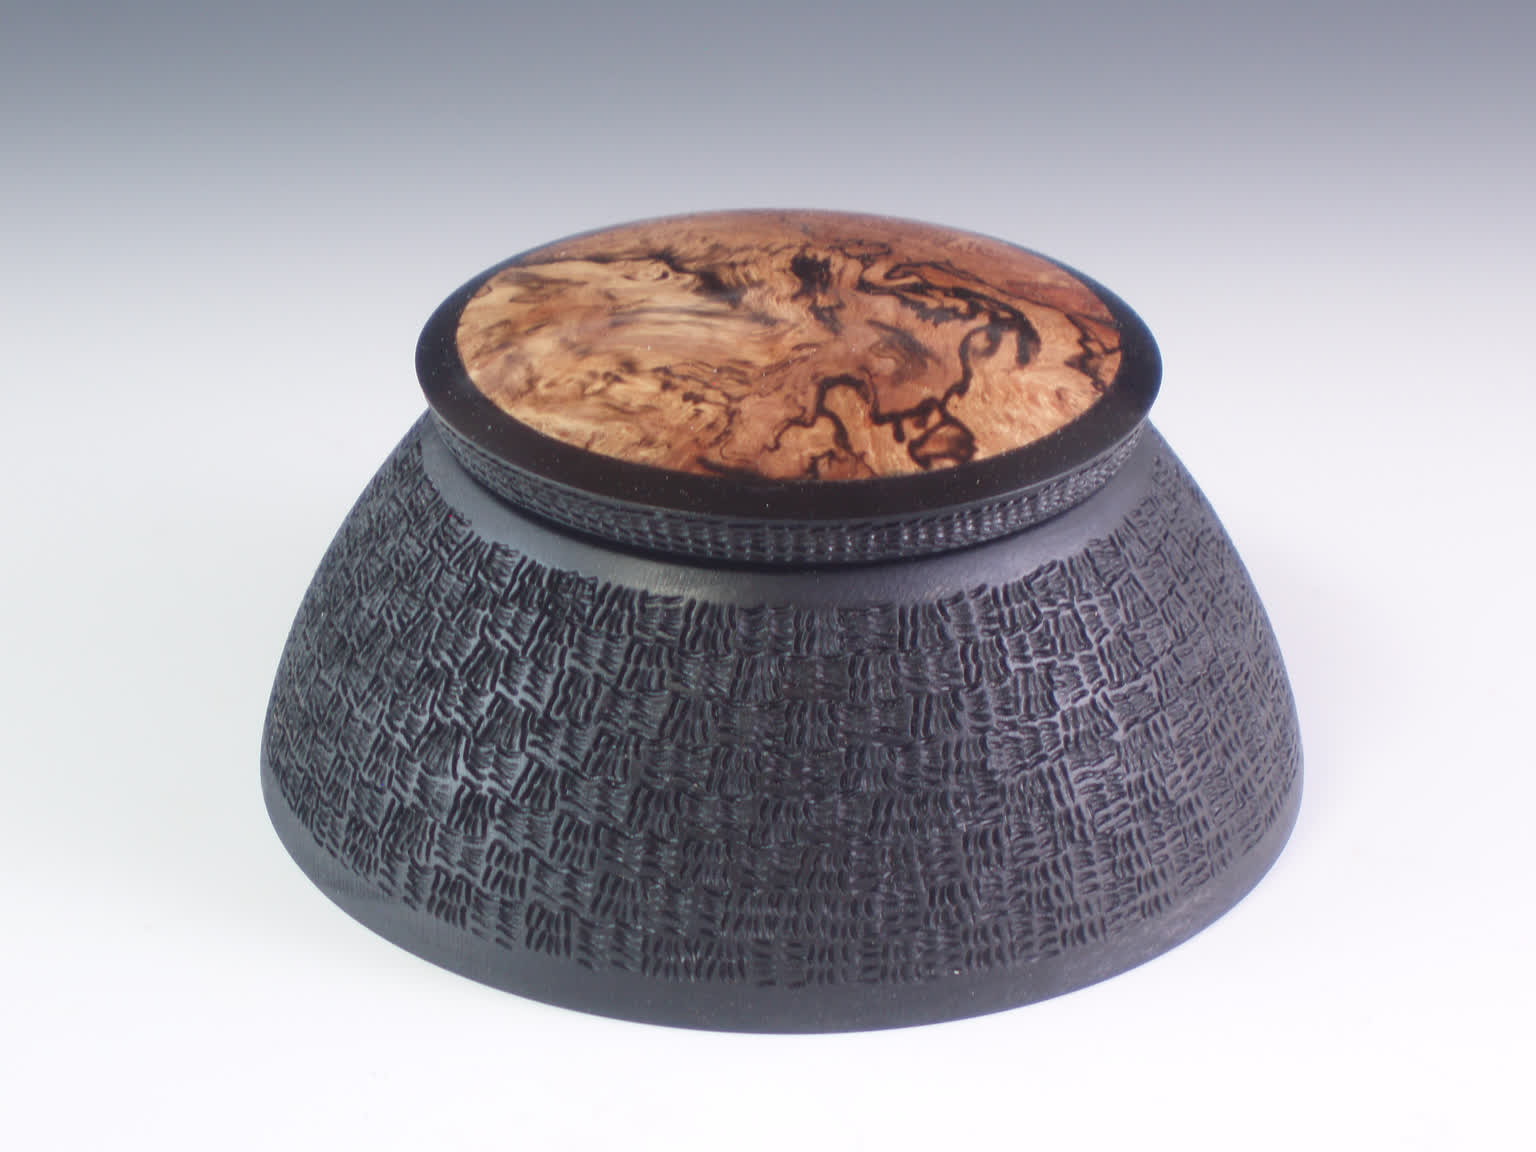 Ebonized and Textured Sycamore Vessel with Lid (C1012)